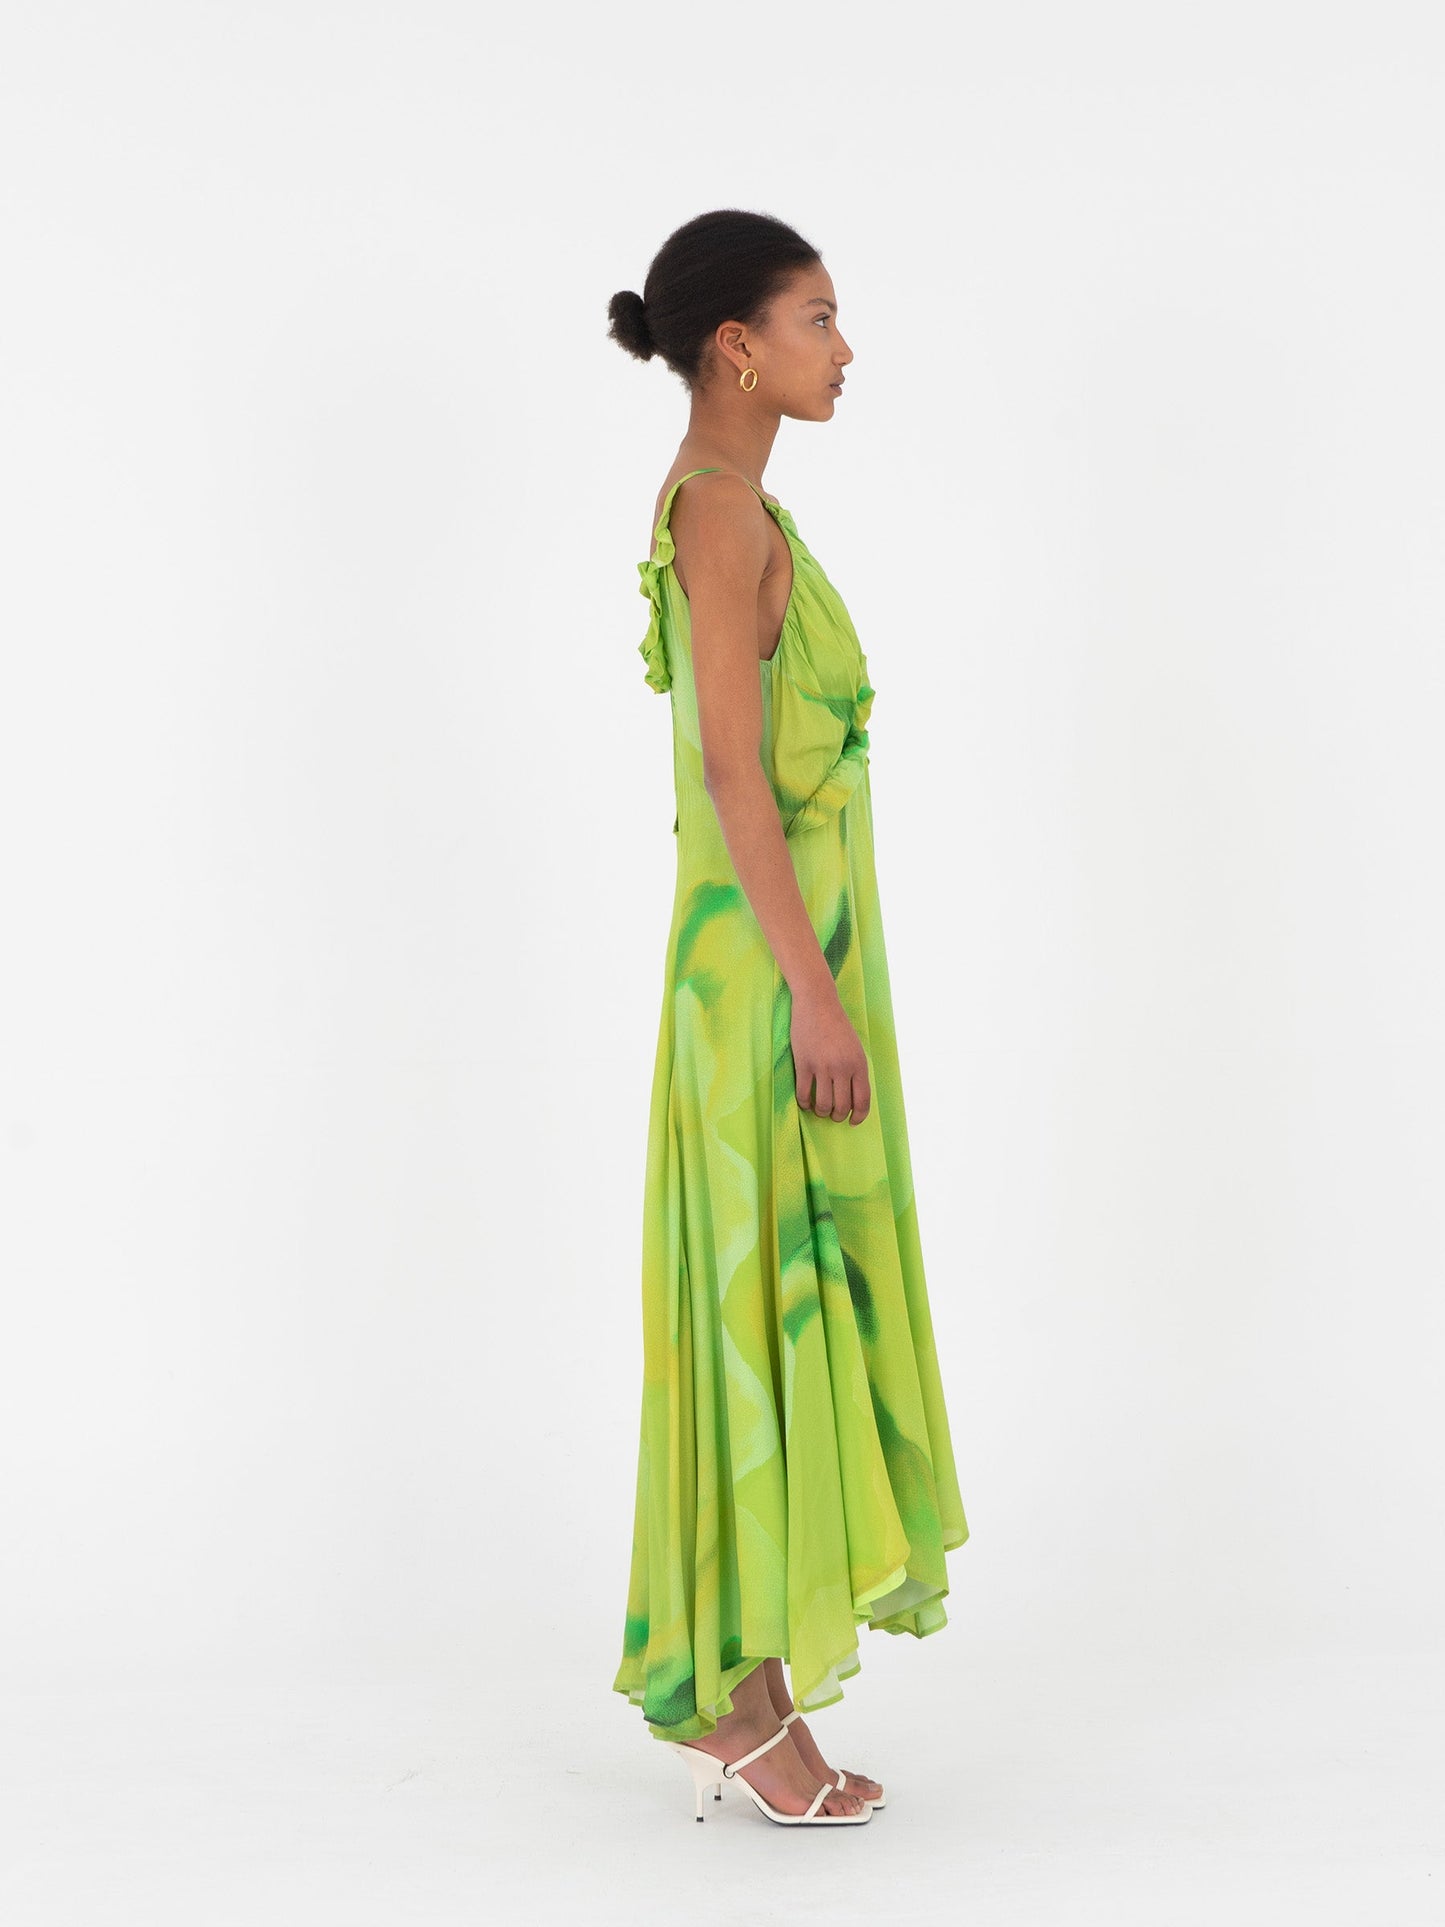 Water lily dress